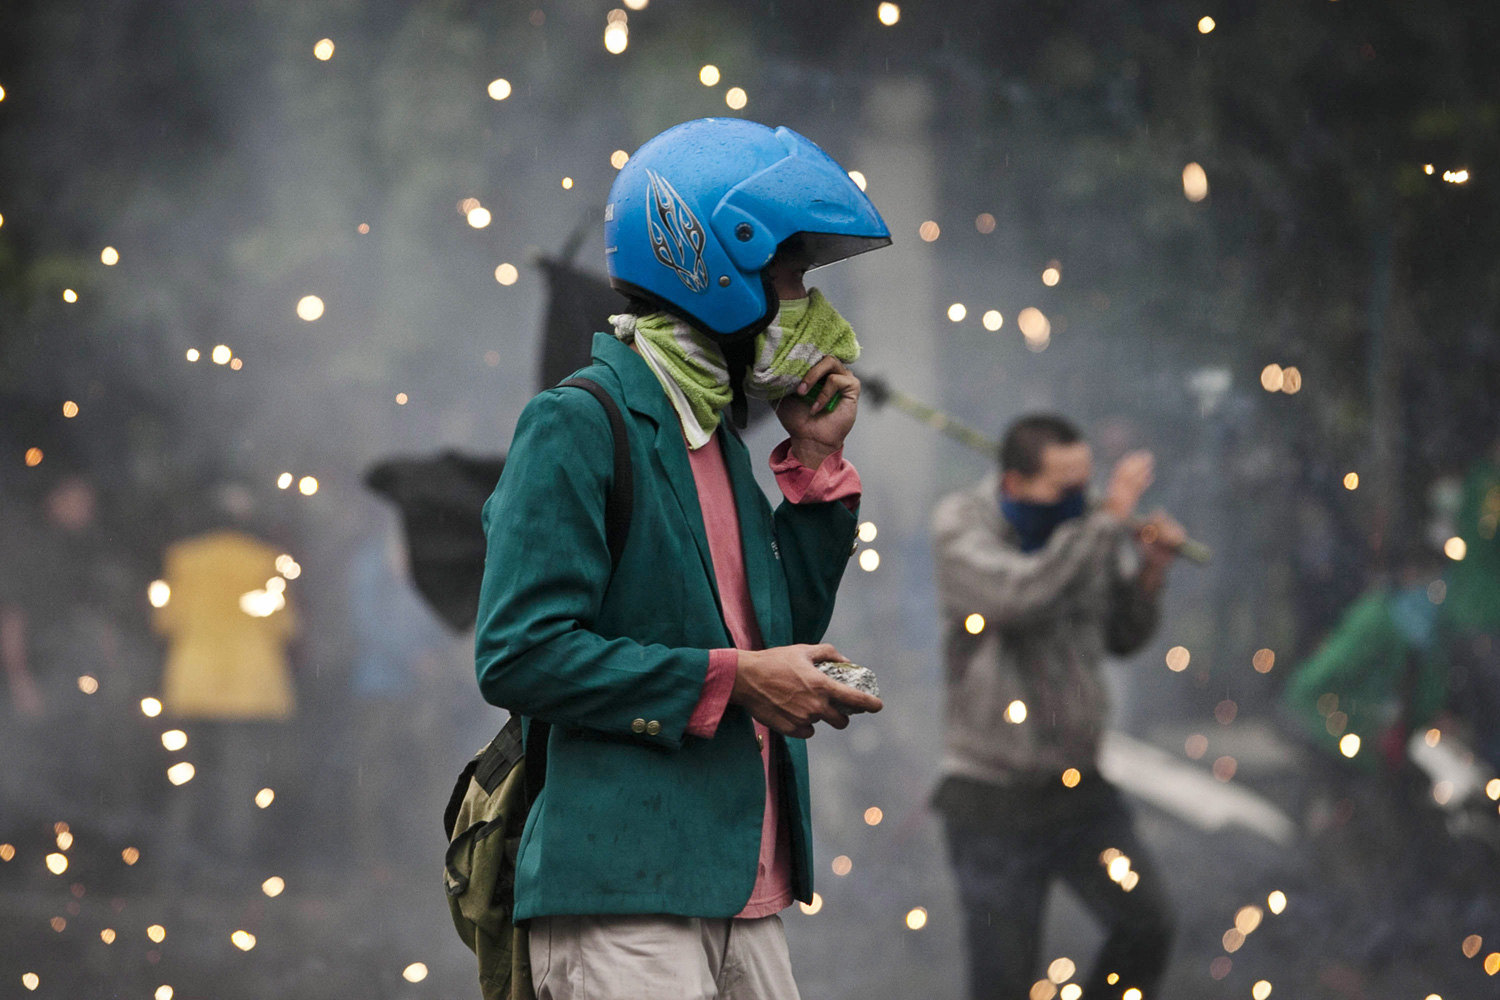 March 27, 2012. A student holds a rock during clashes with police during protests against planned fuel price hikes in Jakarta.